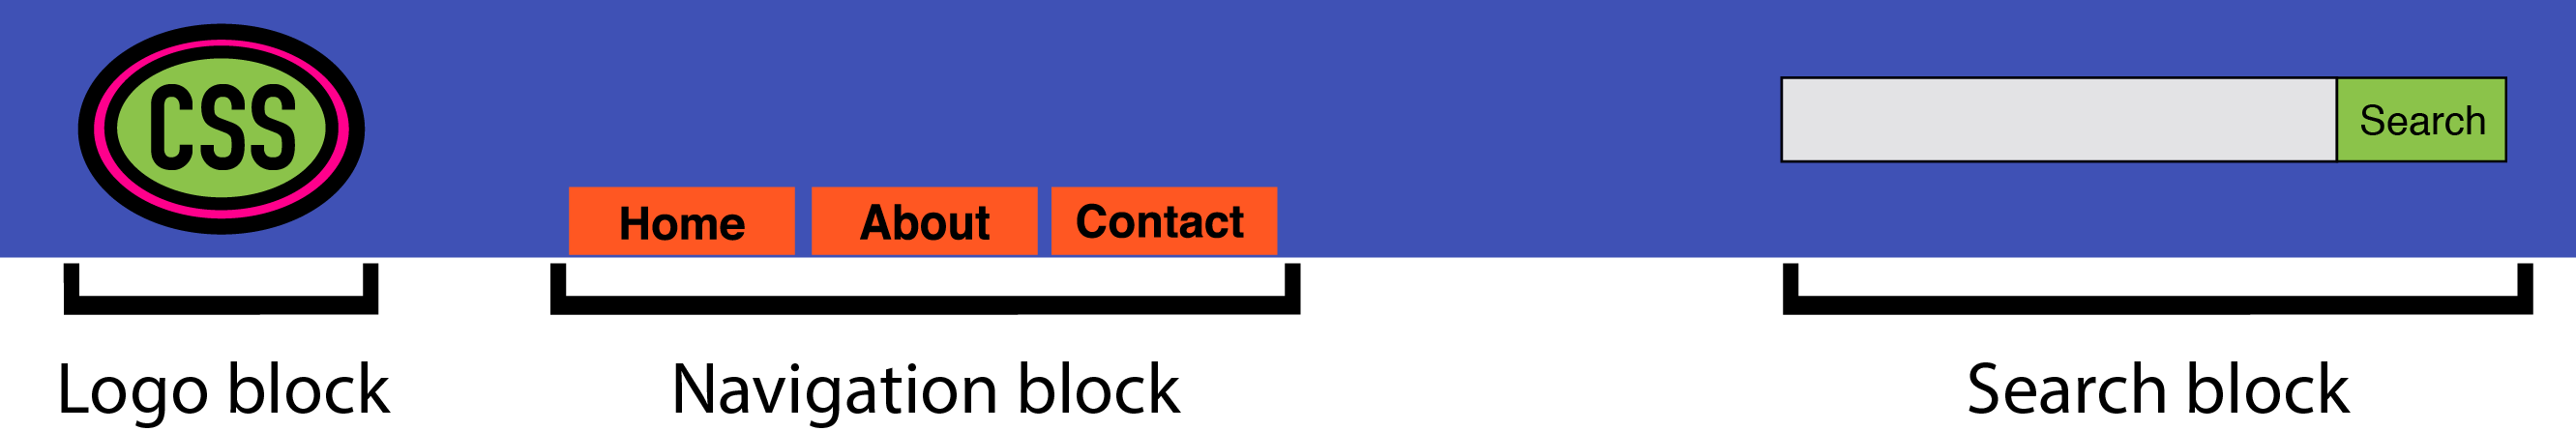 A header block that contains logo, navigation, and search blocks